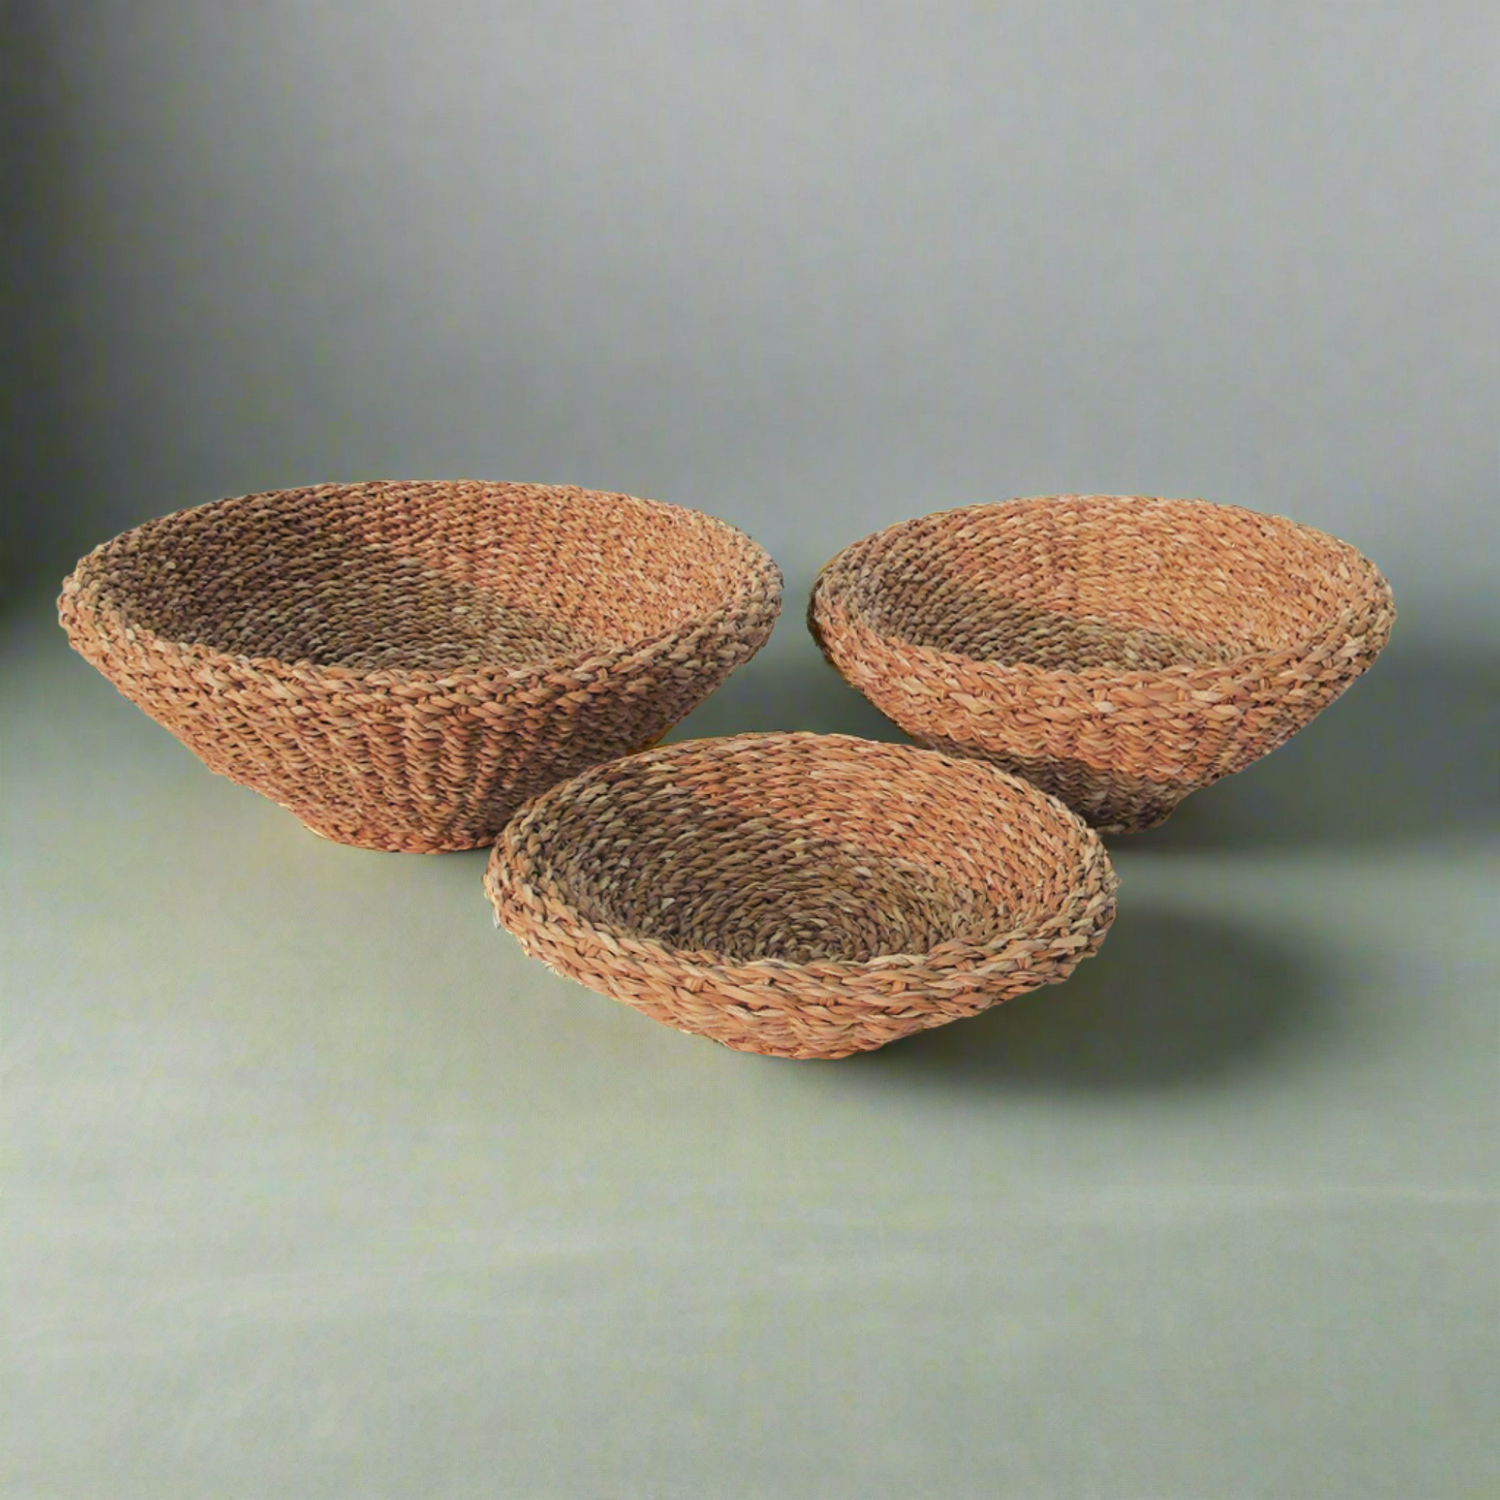 Seagrass Shallow Tapered Baskets, Set Of 3